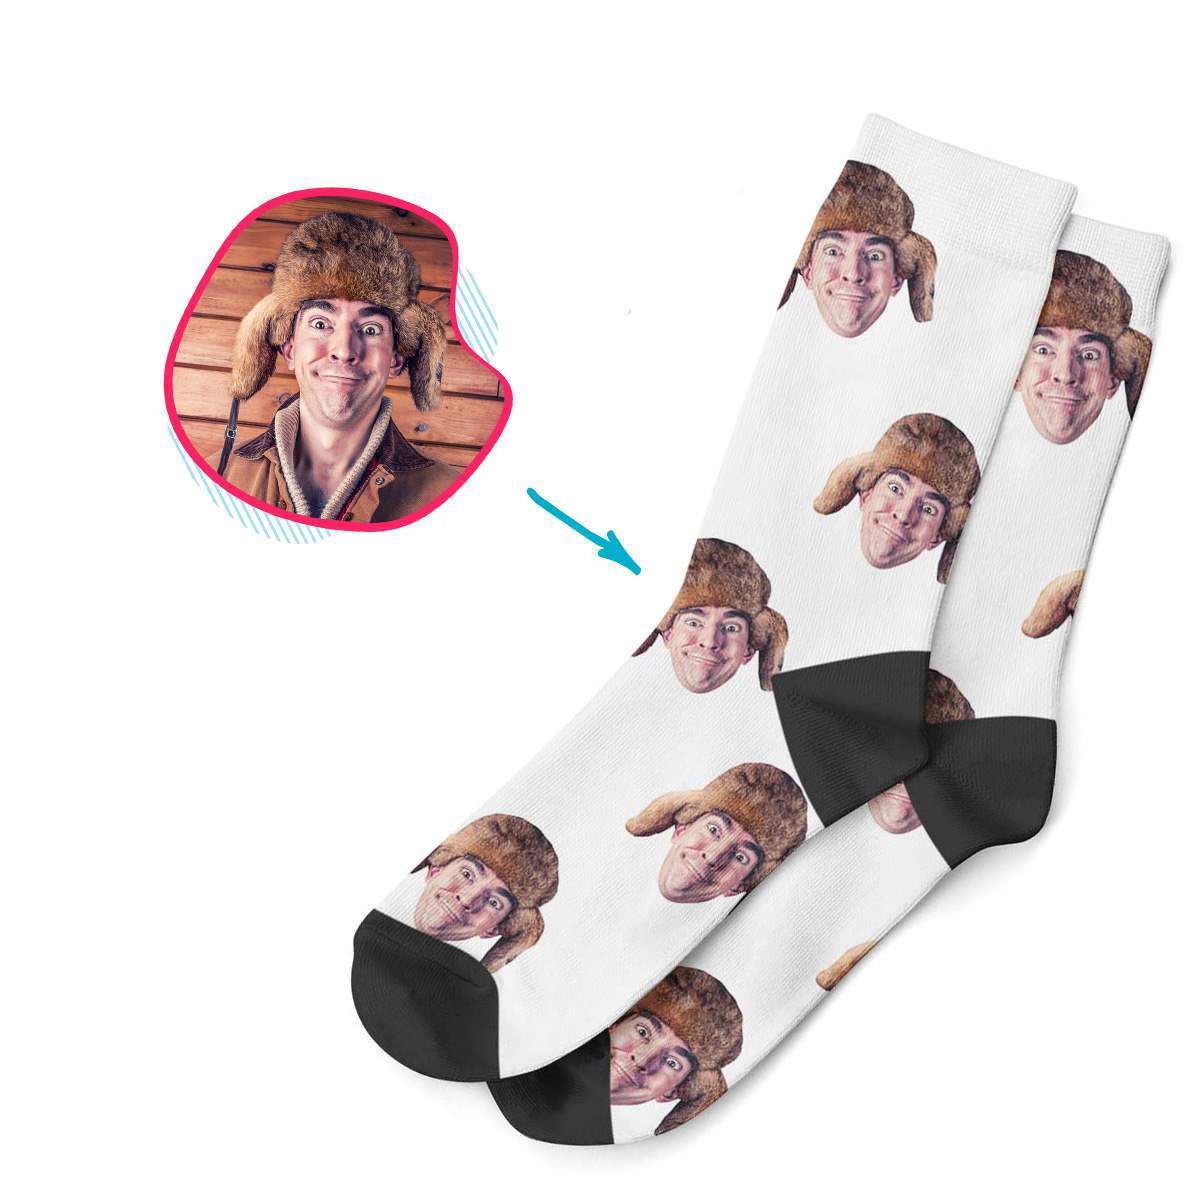 white Blank design socks personalized with photo of face printed on them